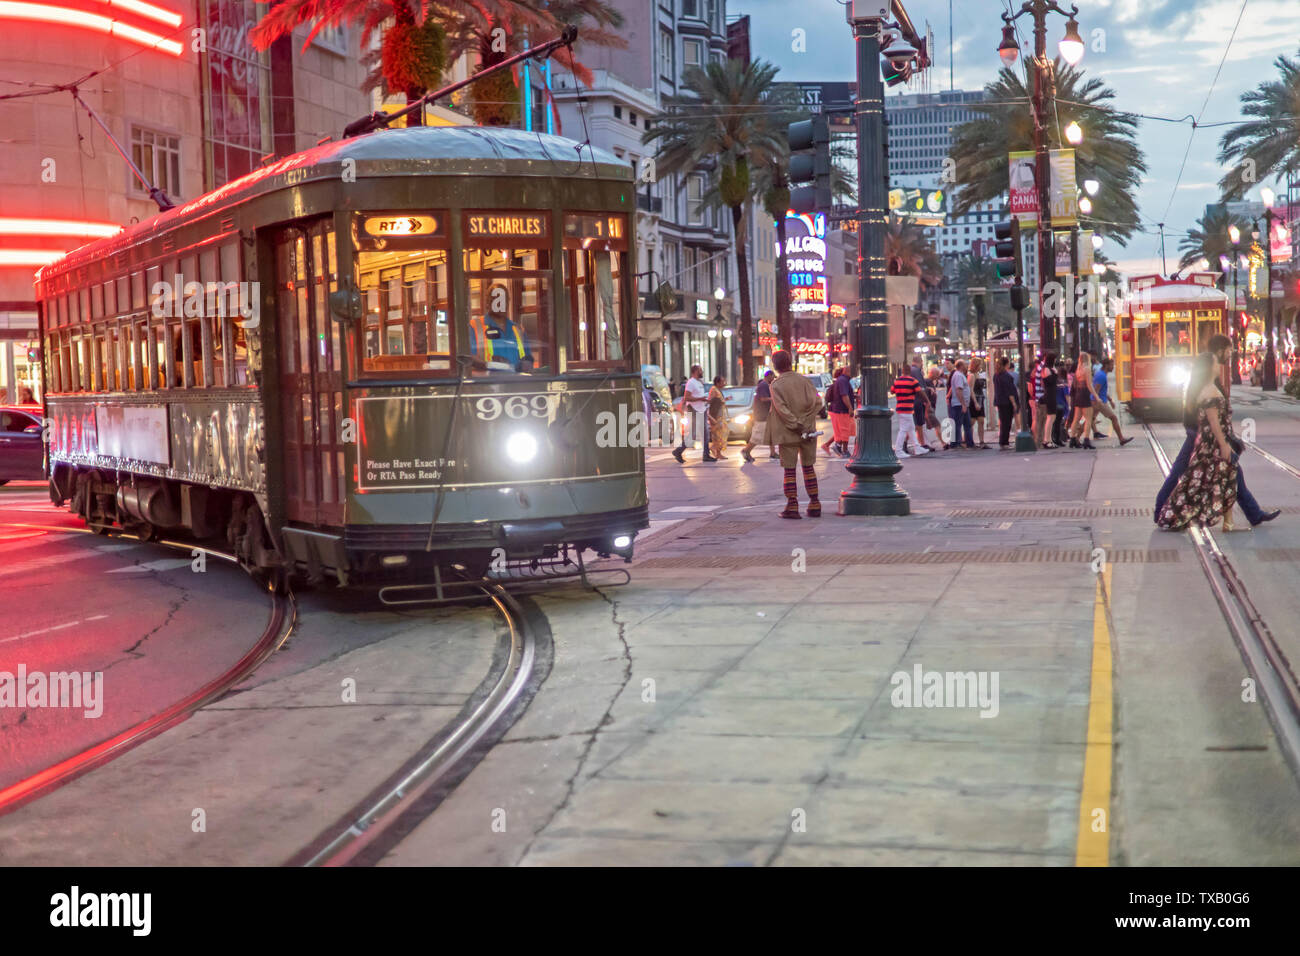 New Orleans, Louisiana - New Orleans streetcars on Canal Street. Stock Photo